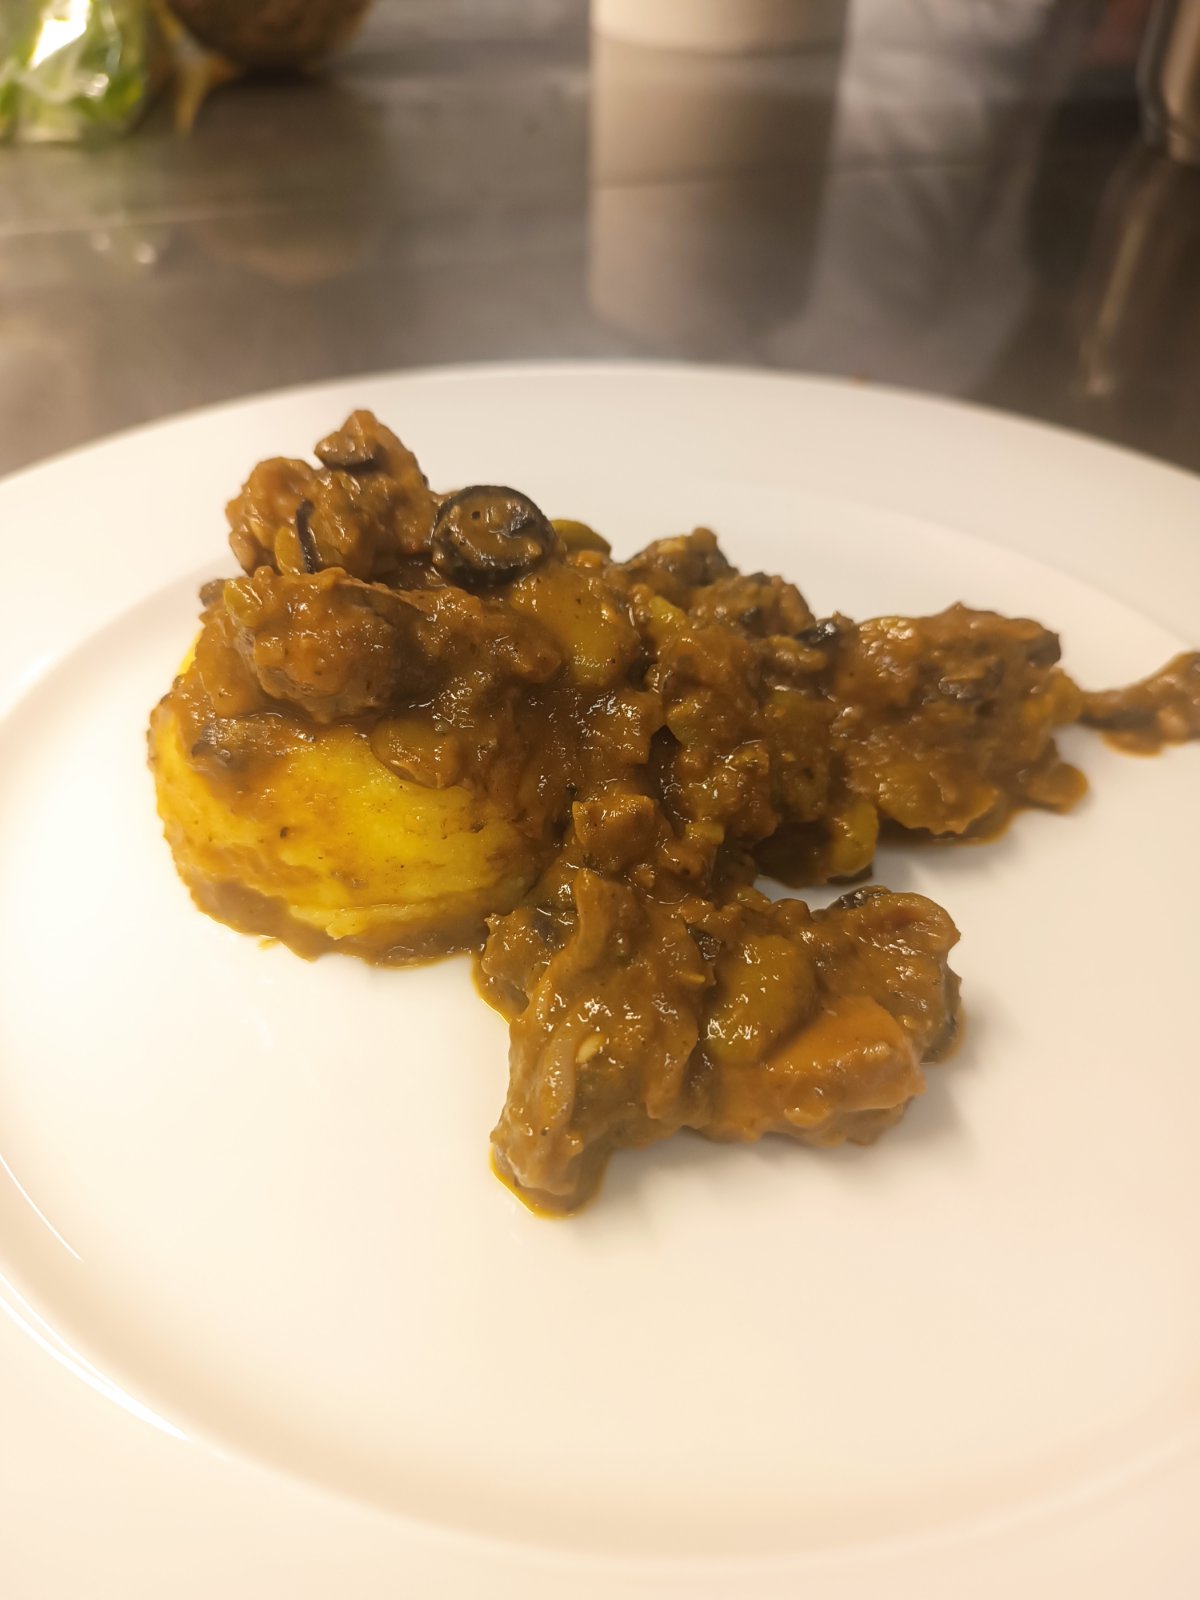 Cuttlefish with lima beans and polenta